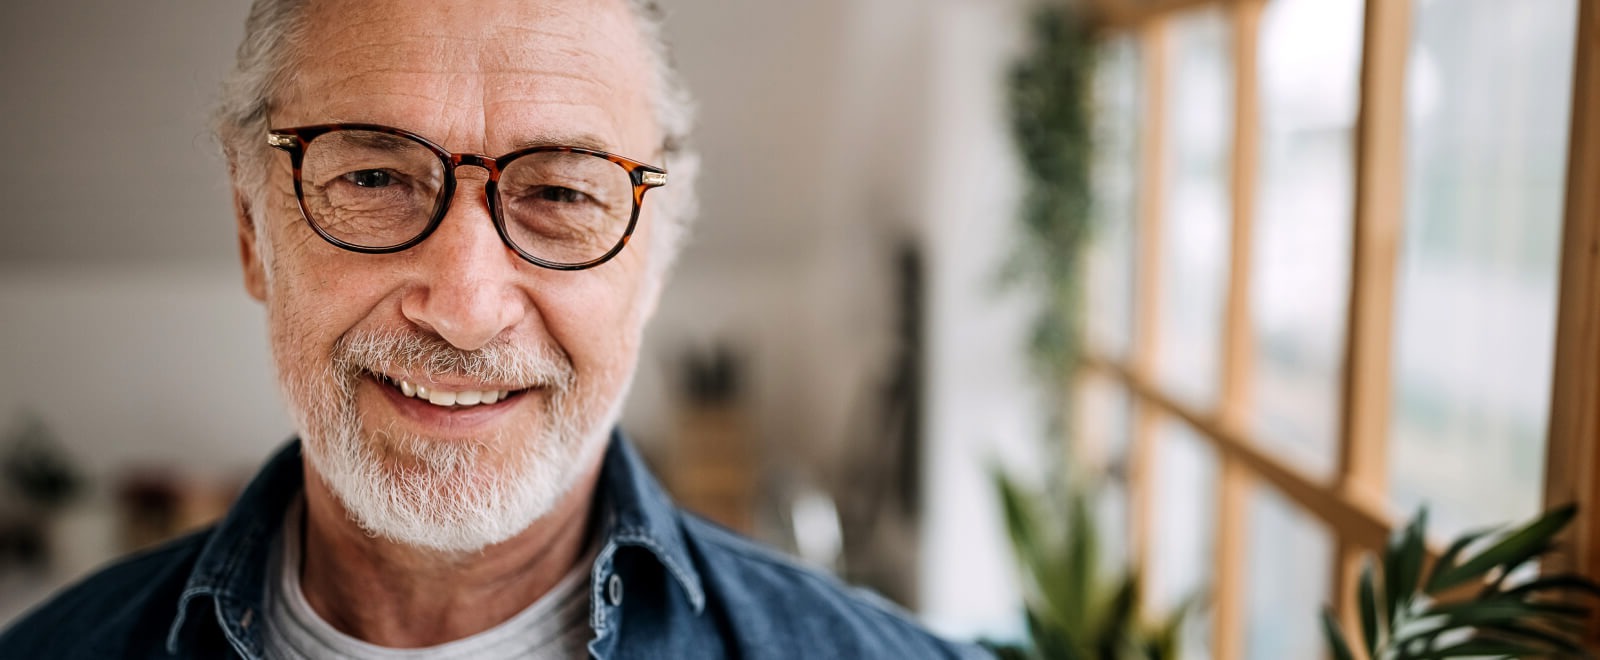 Man with glasses smiling in home